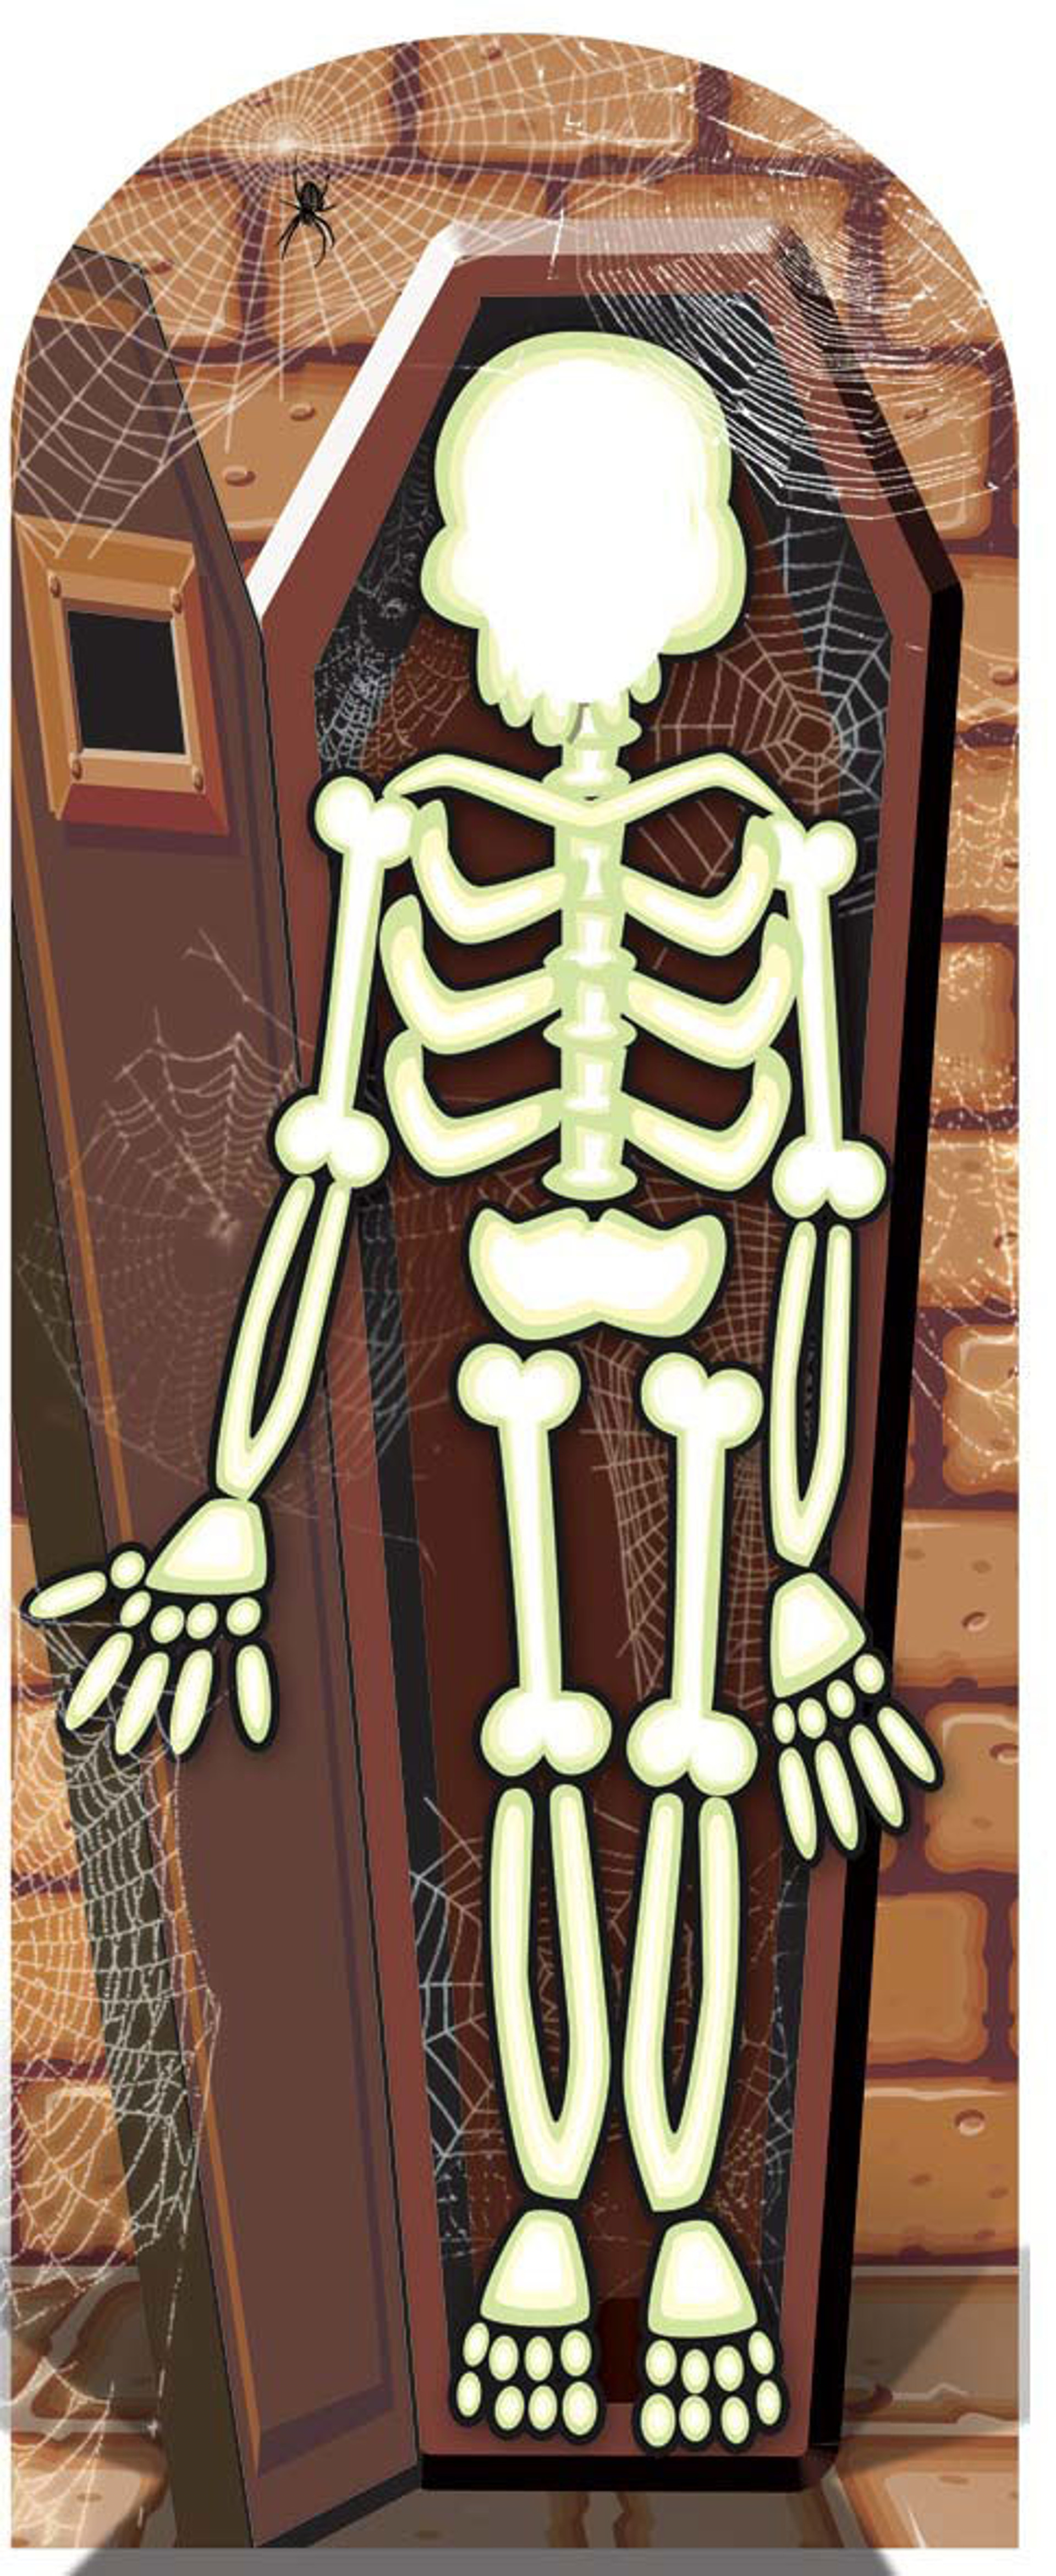 Ss5300 Large Cardboard Cutout Of Small Haunted House Silhouette